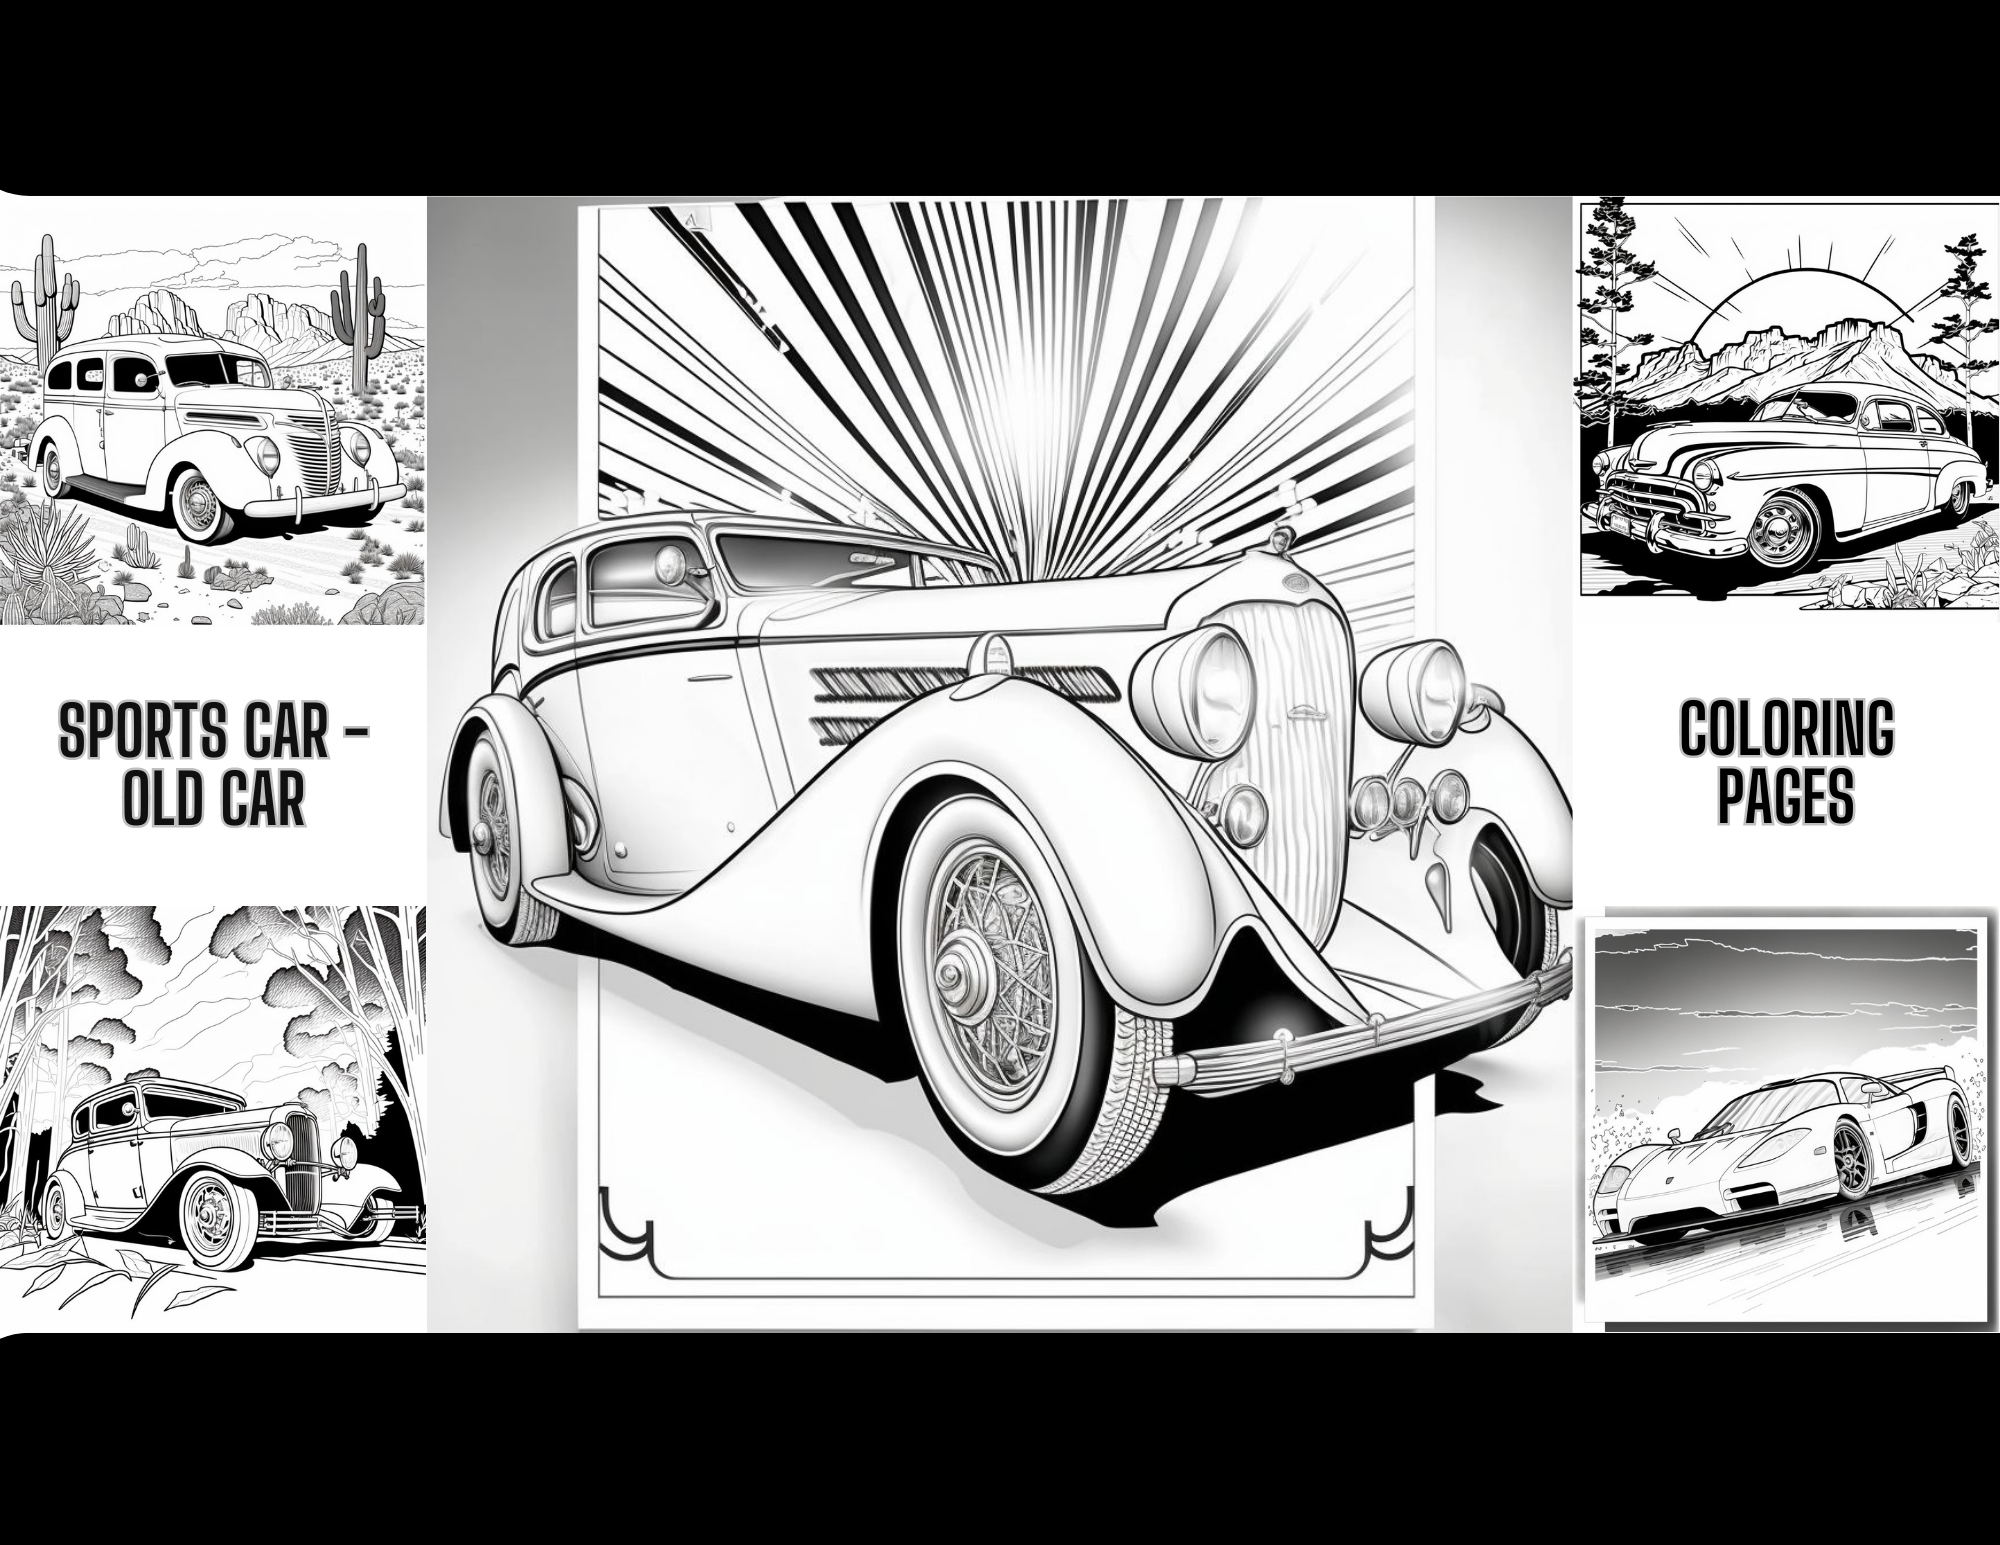 Sports car old car coloring pages